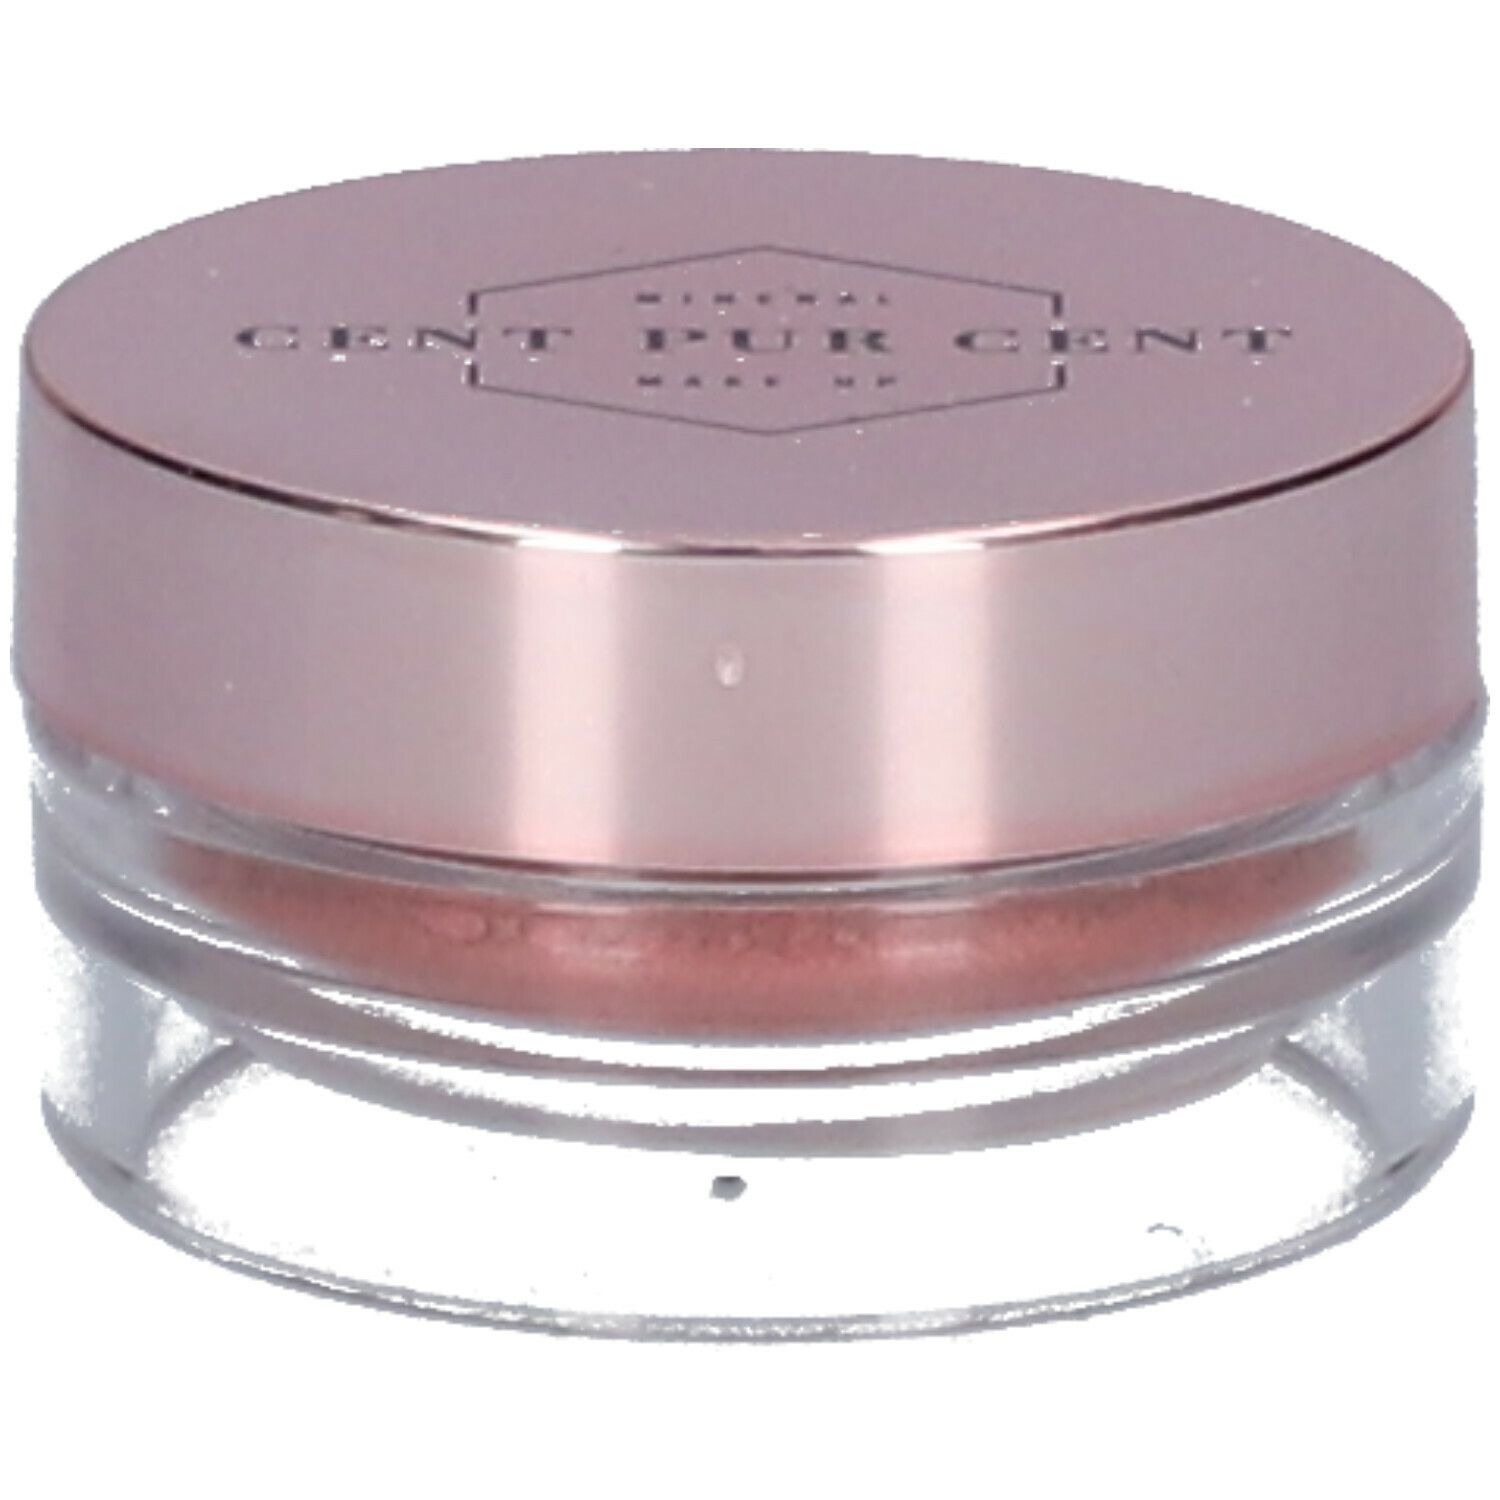 Cent Pur Cent Loose Mineral Eyeshadow Framboise